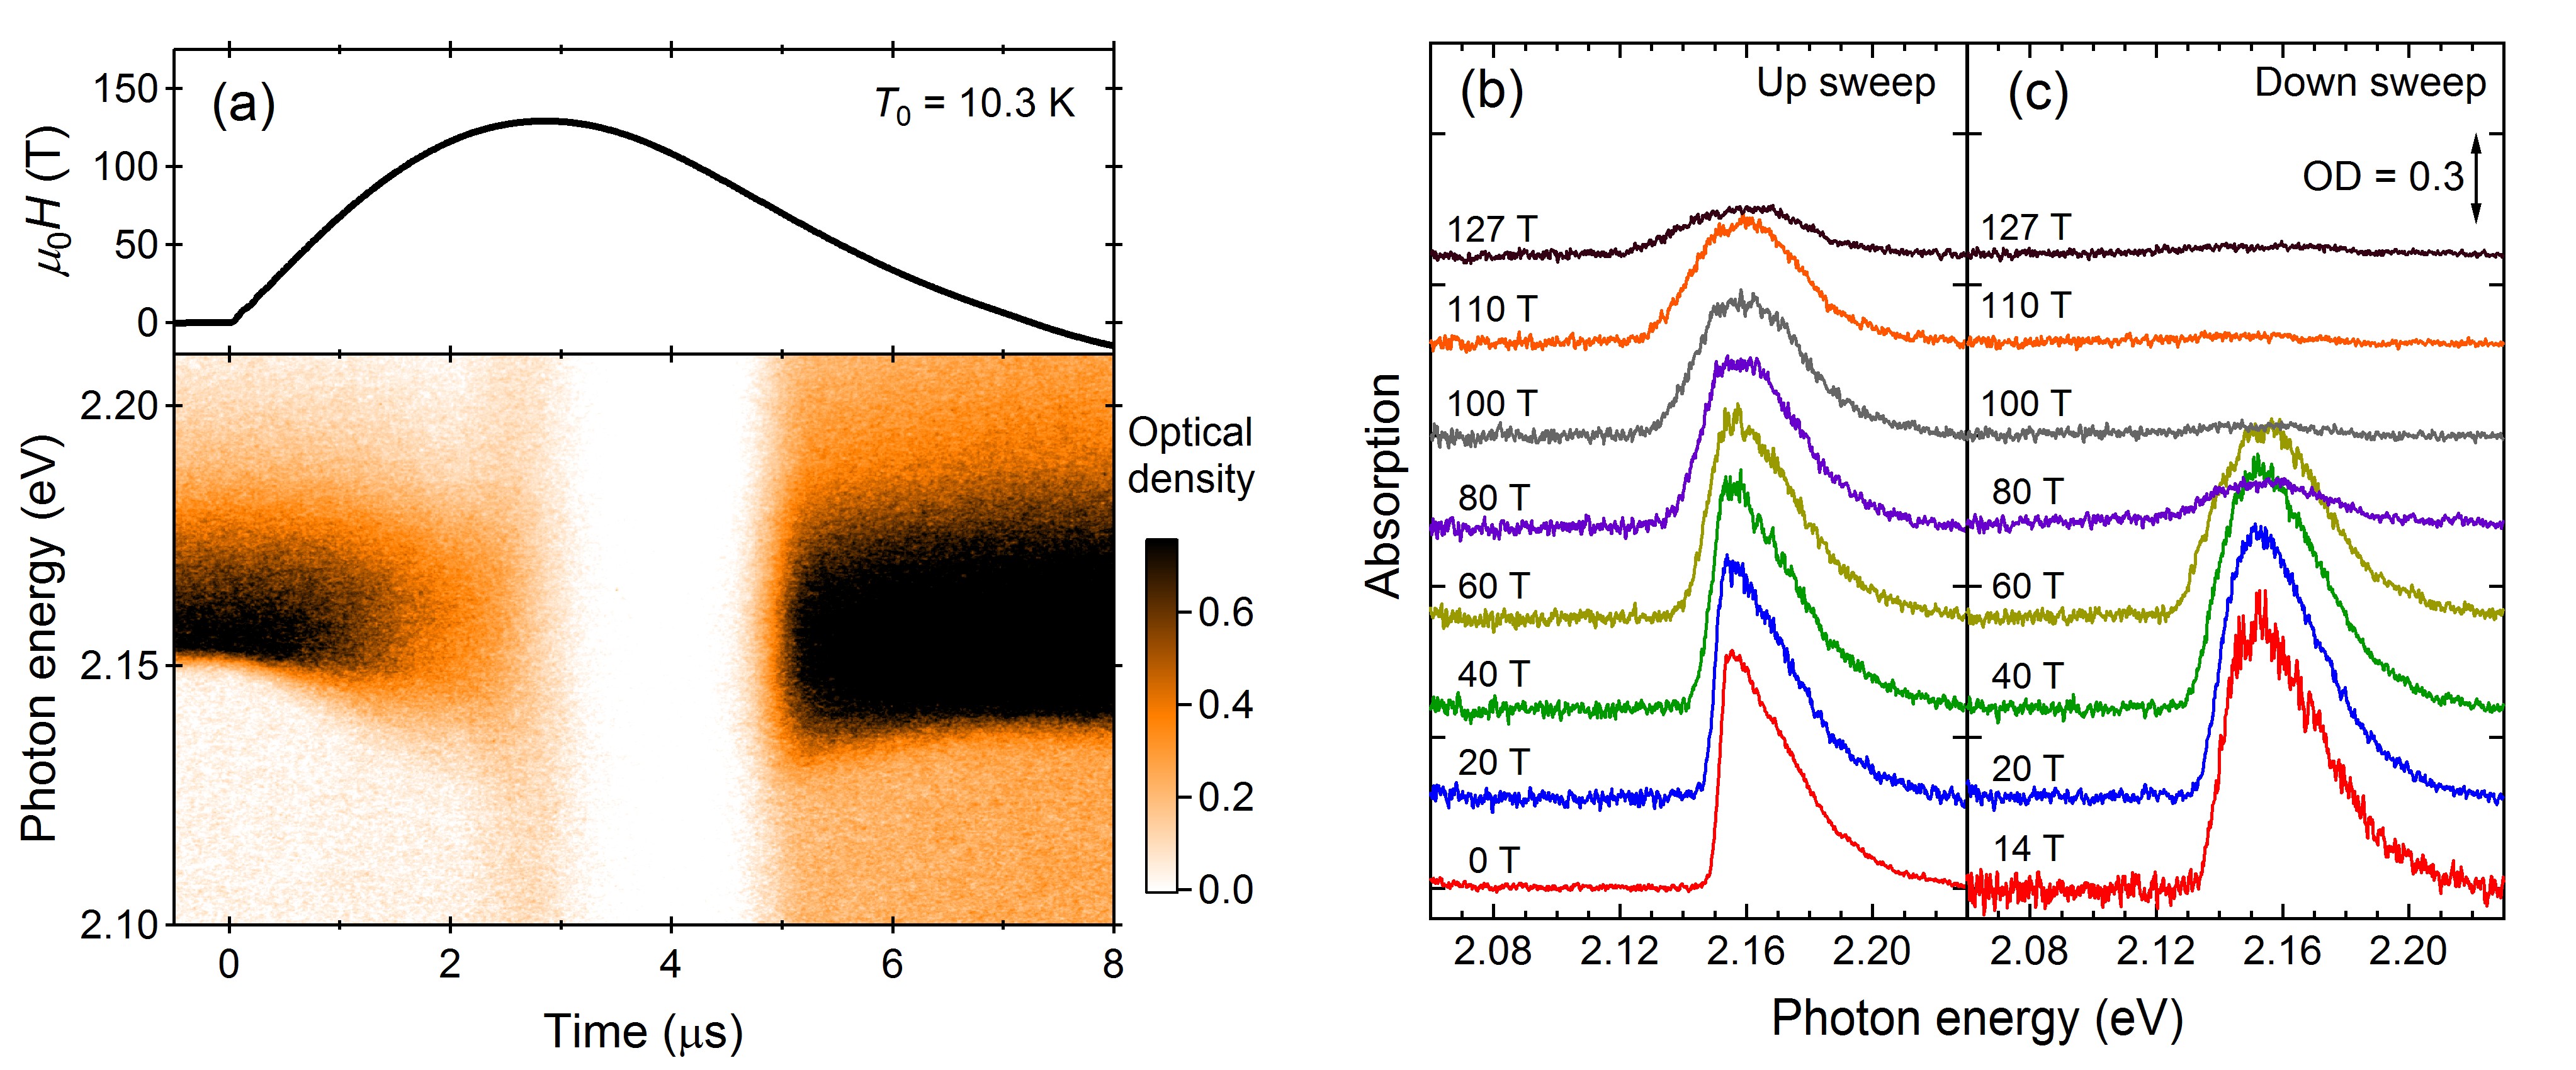 Results of the magneto-optical measurement on solid oxygen. (a) Magnetic field waveform and absorption spectra as a function of time. Optical density (OD) is shown in the color scale. The initial temperature is 10.3 K. (b,c) Absorption spectra for the (b) field-up sweep and (c) field-down sweeps.